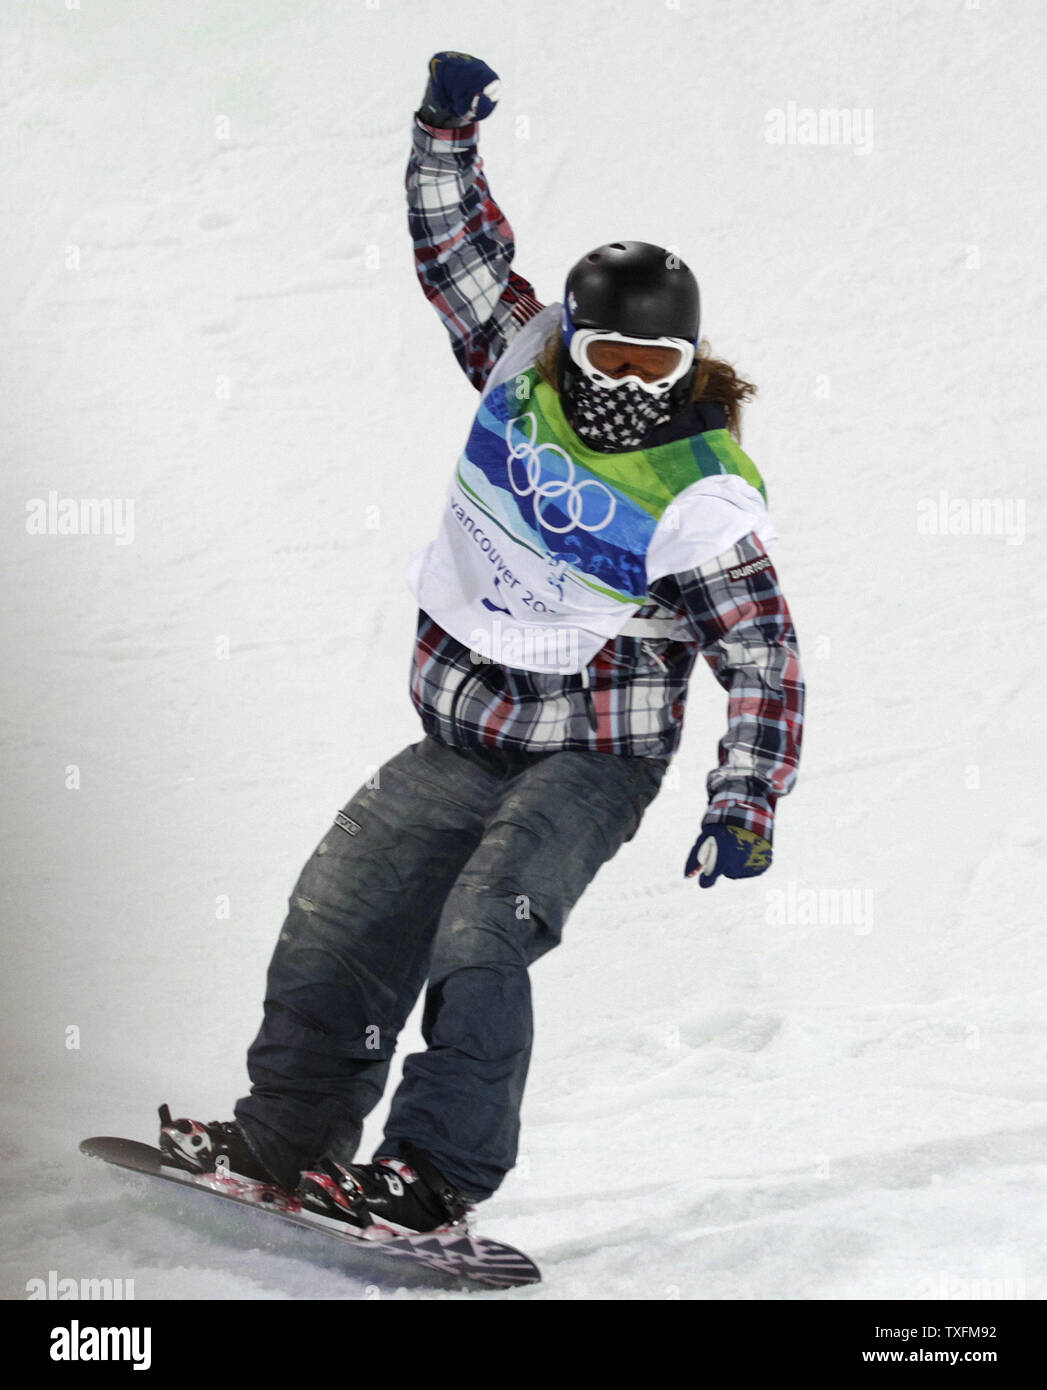 Shaun White of the United States reacts after his first run in the